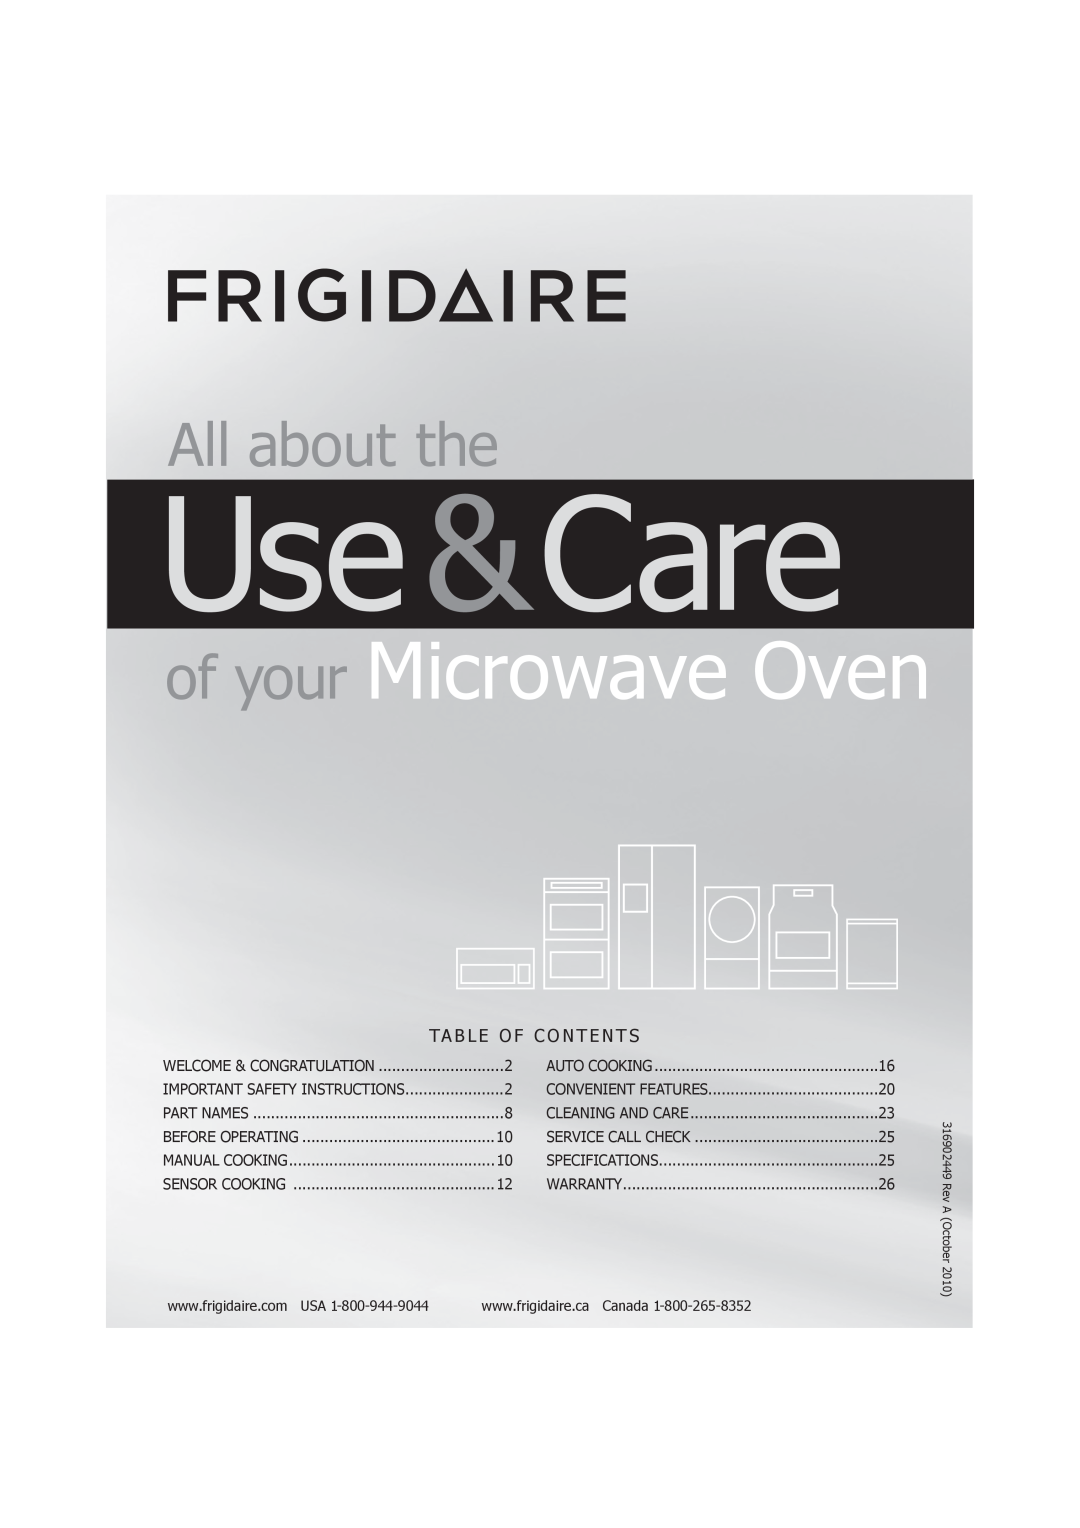 Frigidaire FGMV173KQ, FGMV174KF, FGMV173KW important safety instructions Use &Care, of your Microwave Oven, All about the 